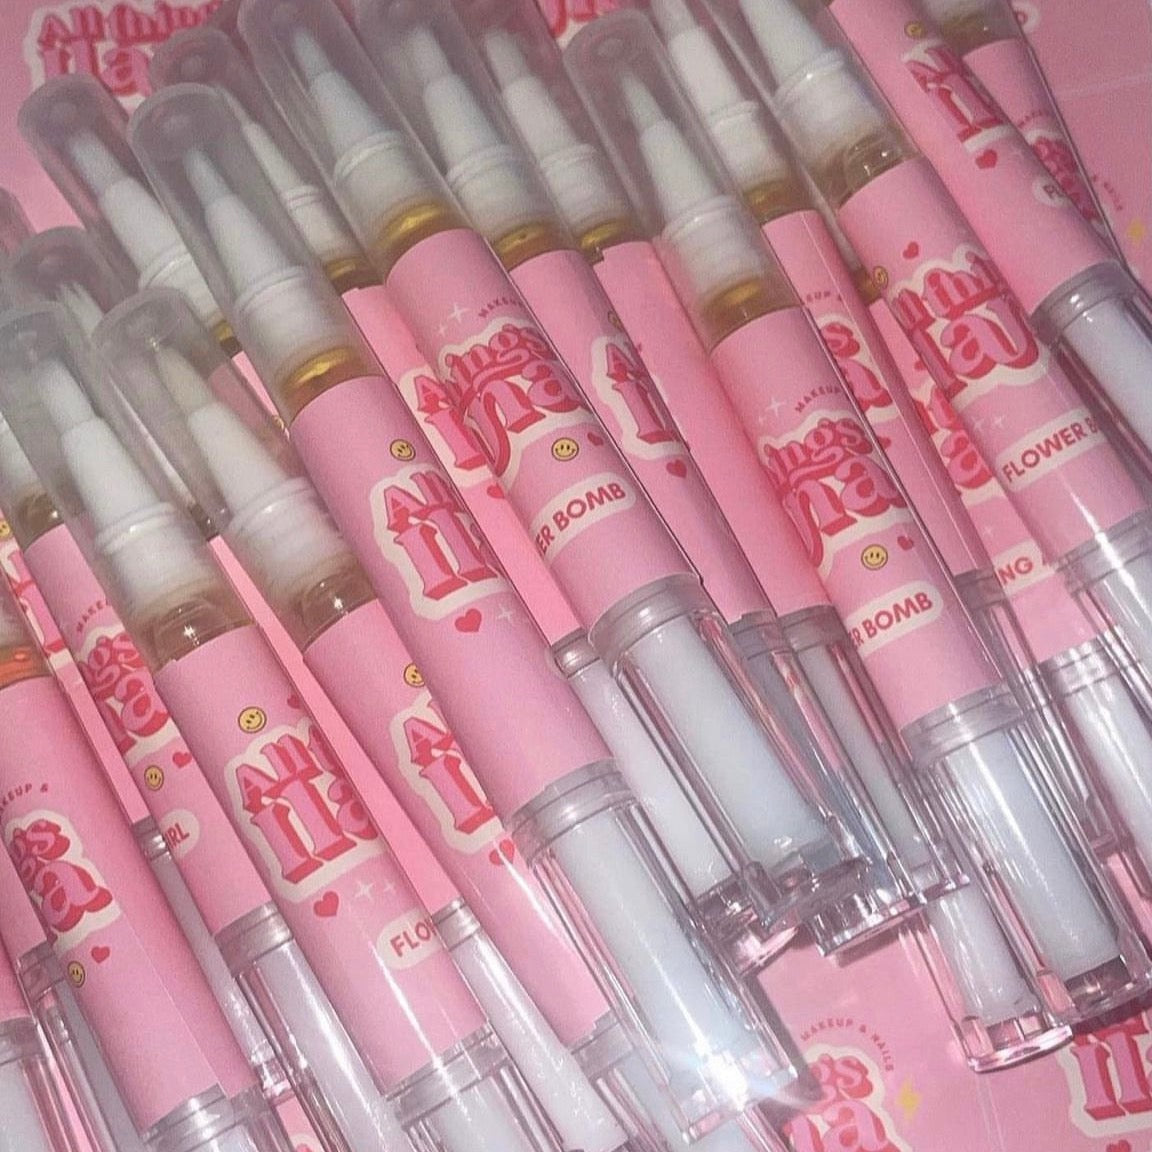 5.09 x 4.8 Cuticle Oil Pen Personalised Stickers